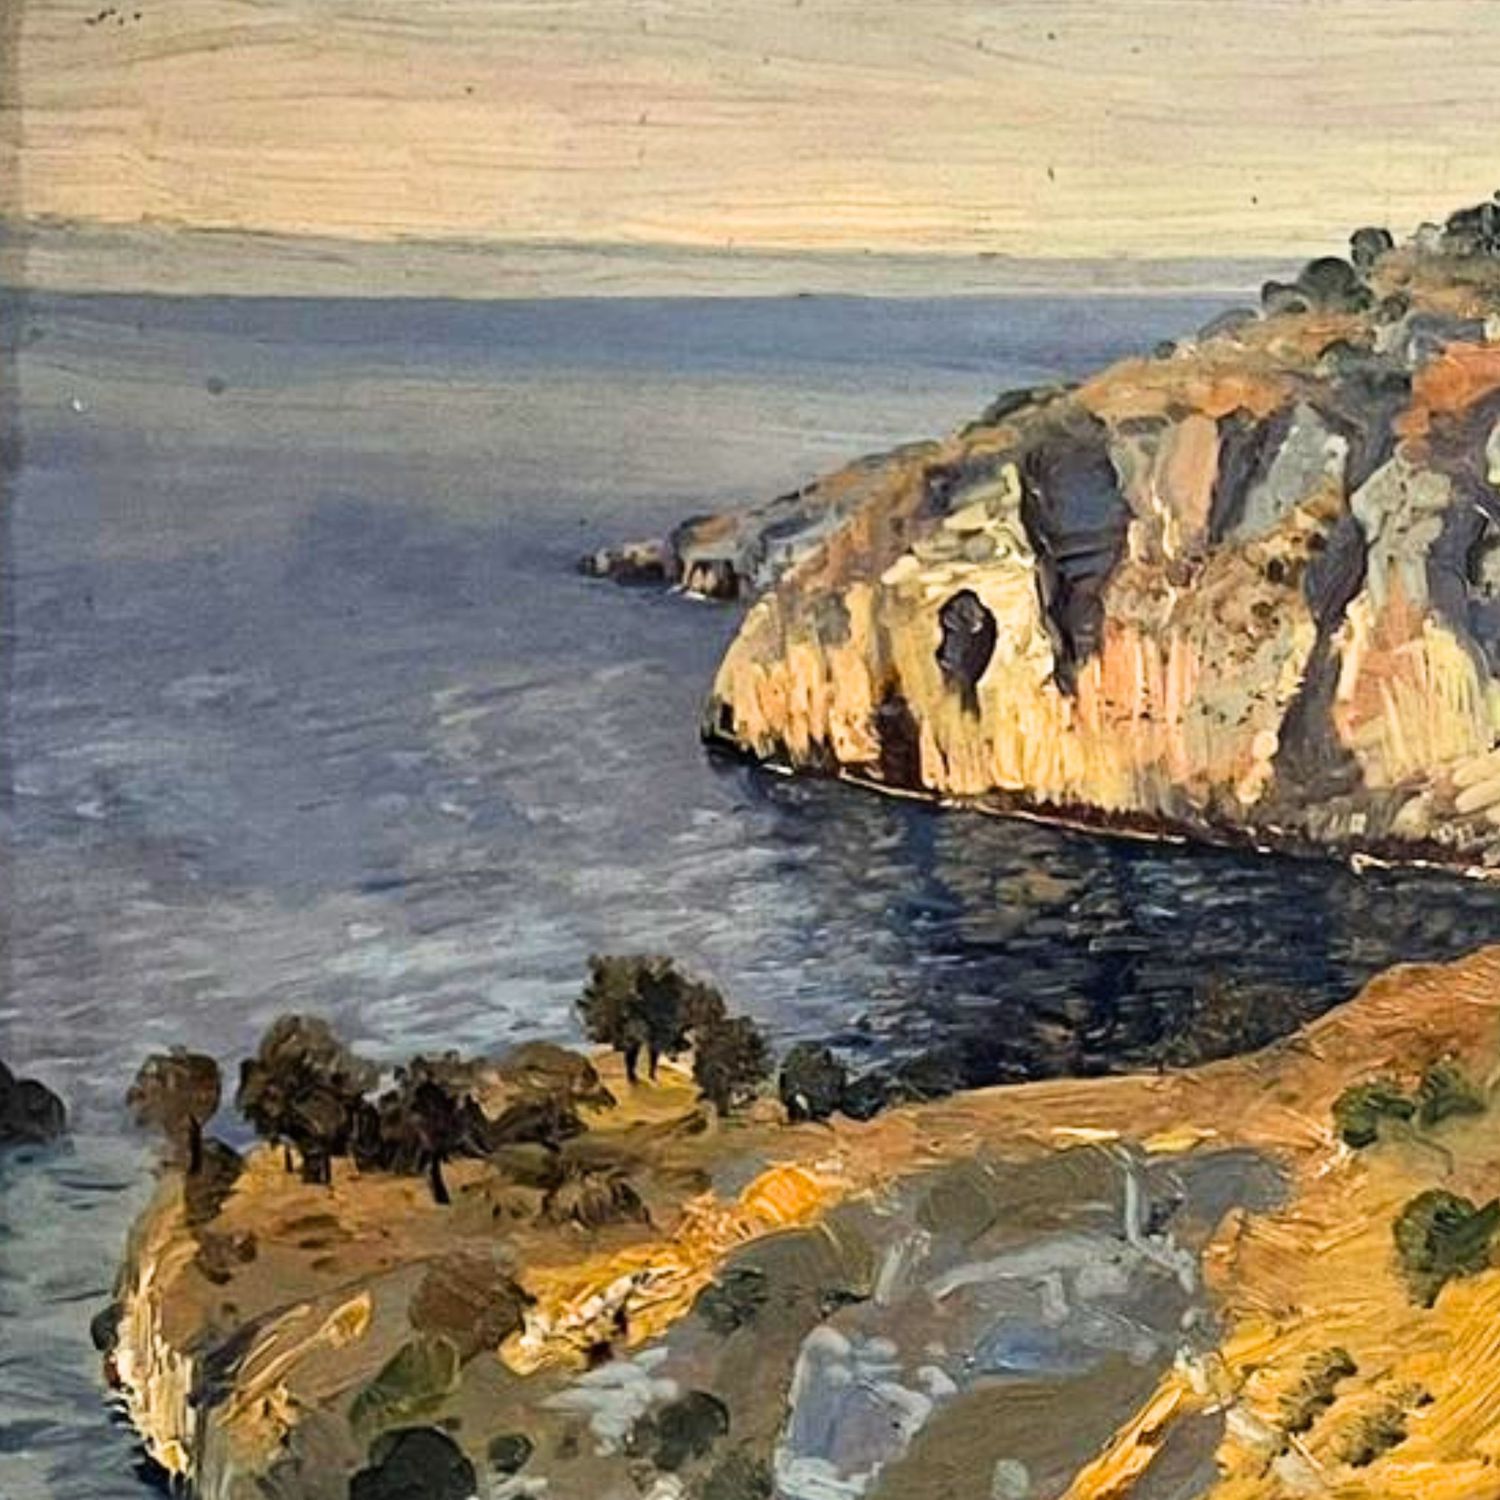 Cliff by the Sea - Max Roeder (1866 - 1947) - Image 2 of 5